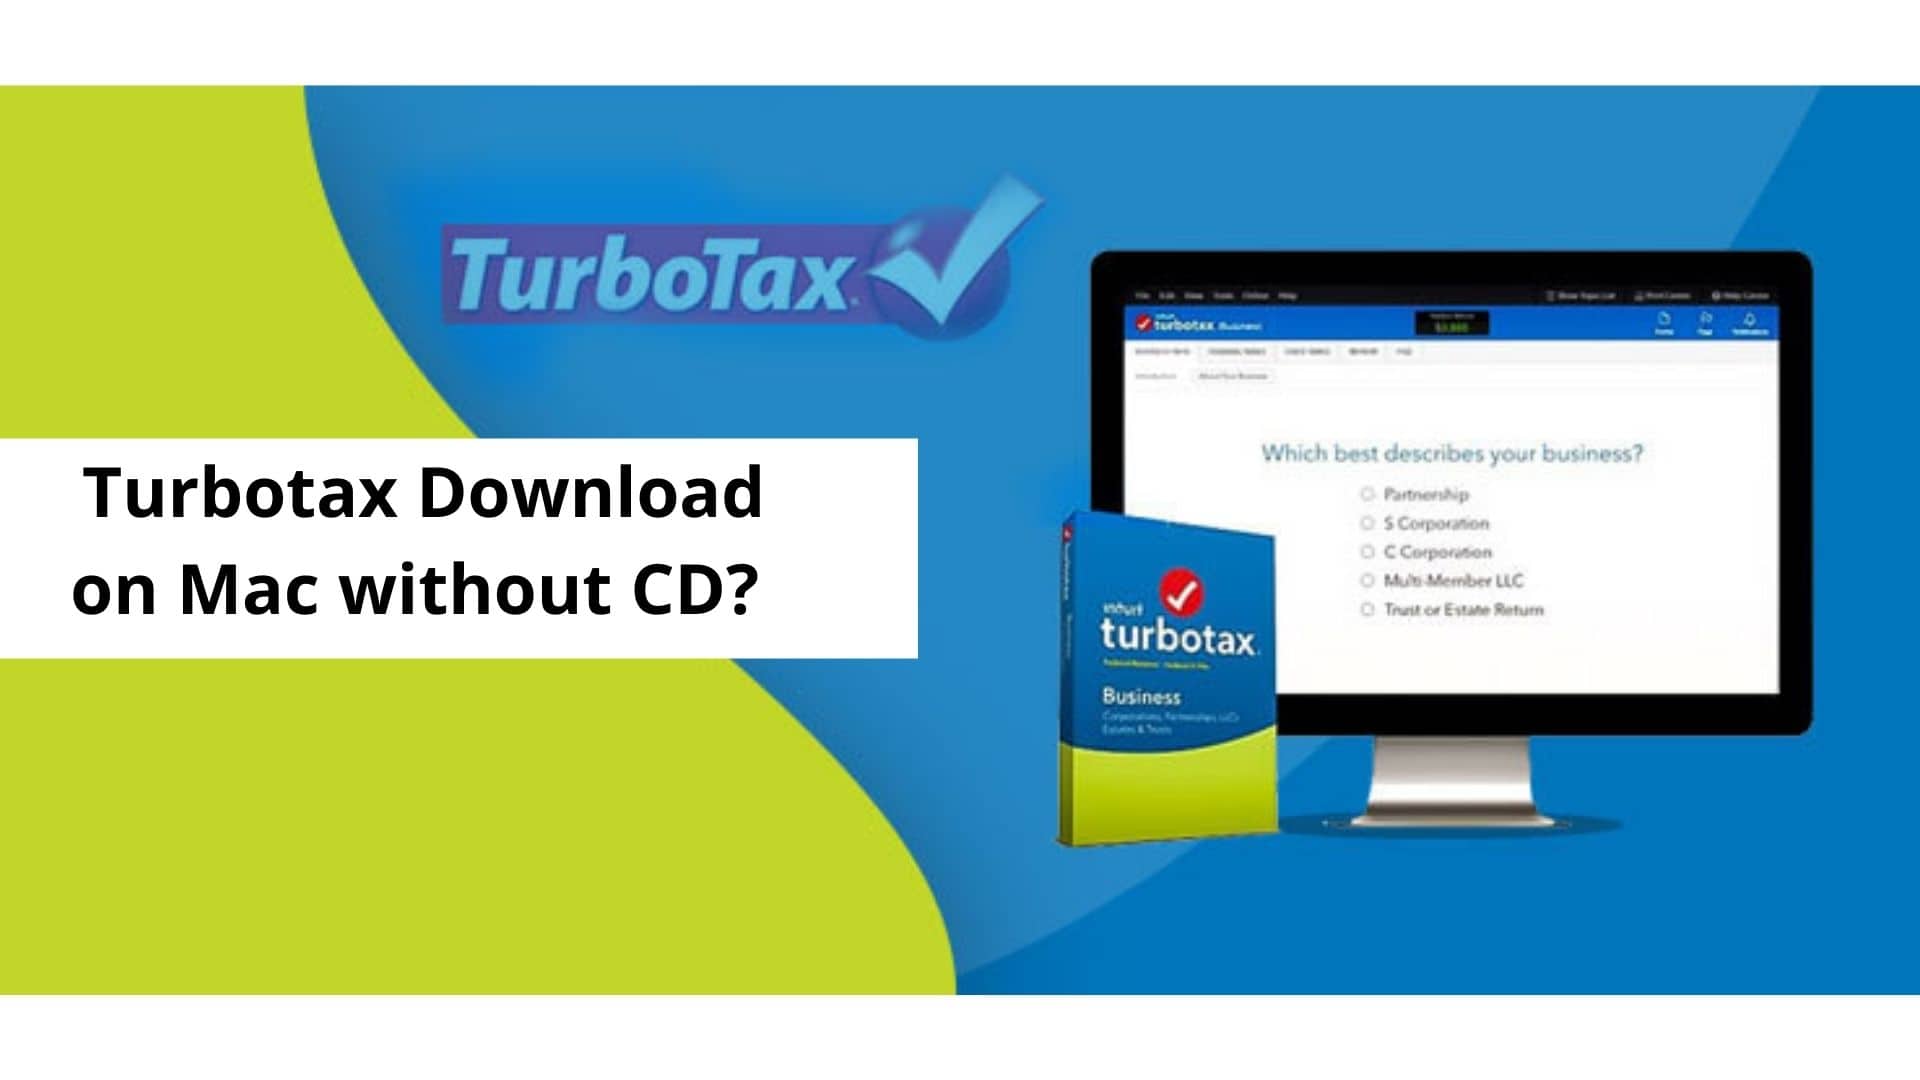 Turbotax Download on Mac without CD